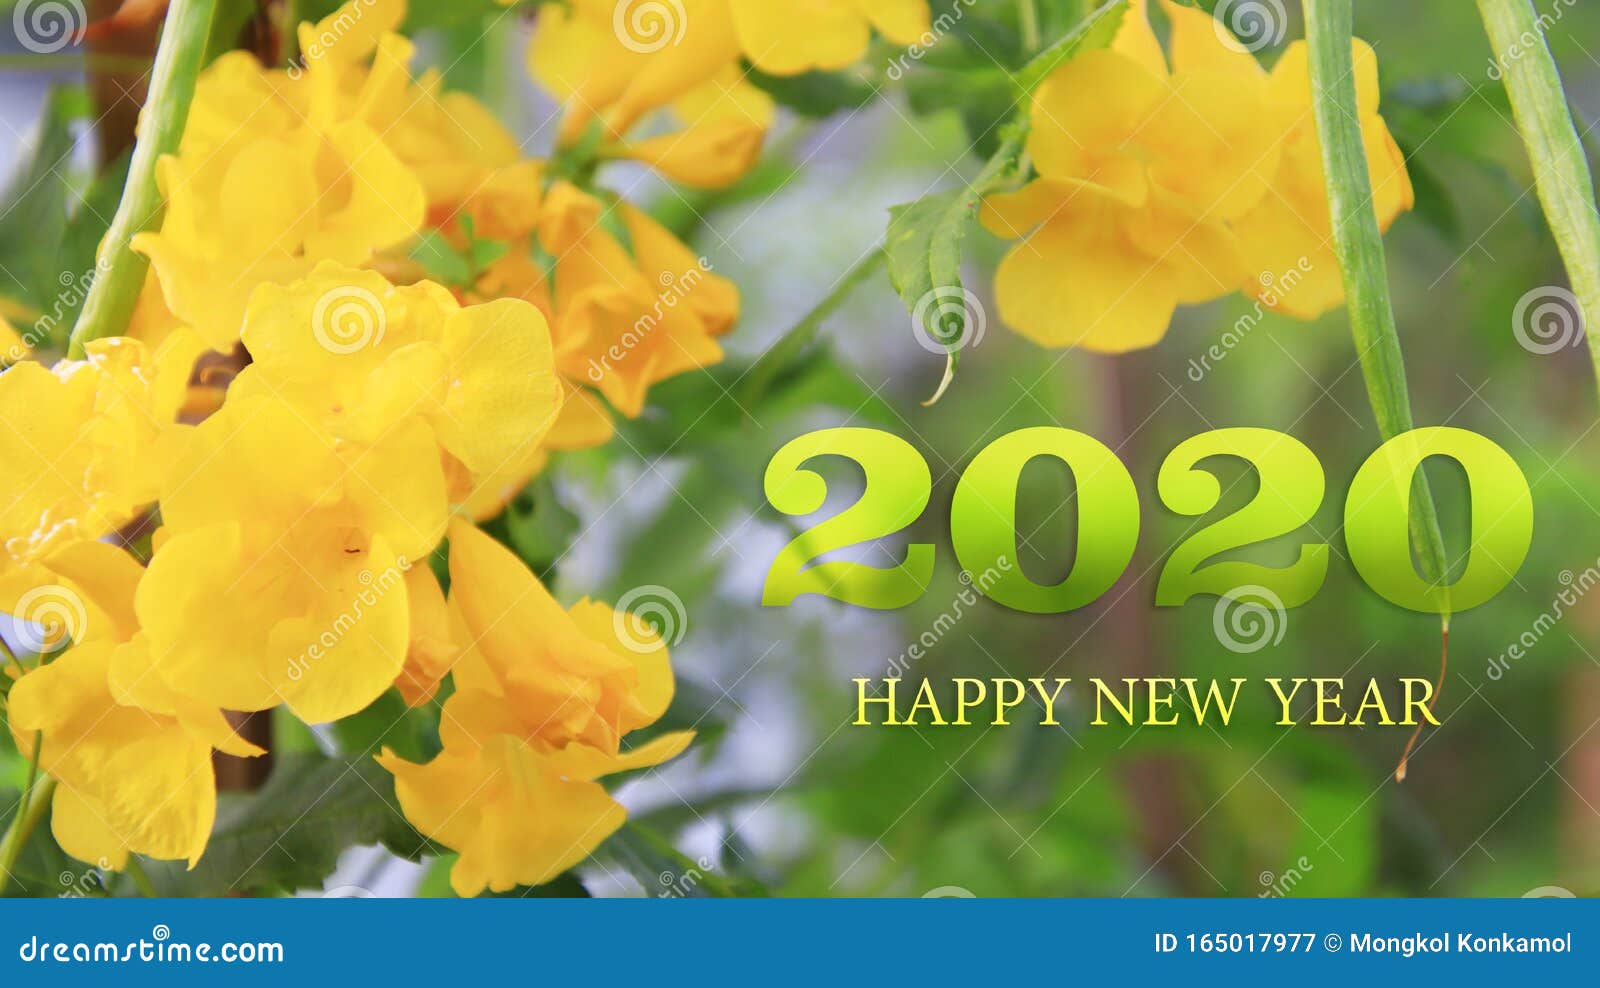 Happy New Year 2020 Greeting Card with Beautiful Yellow Flower ...